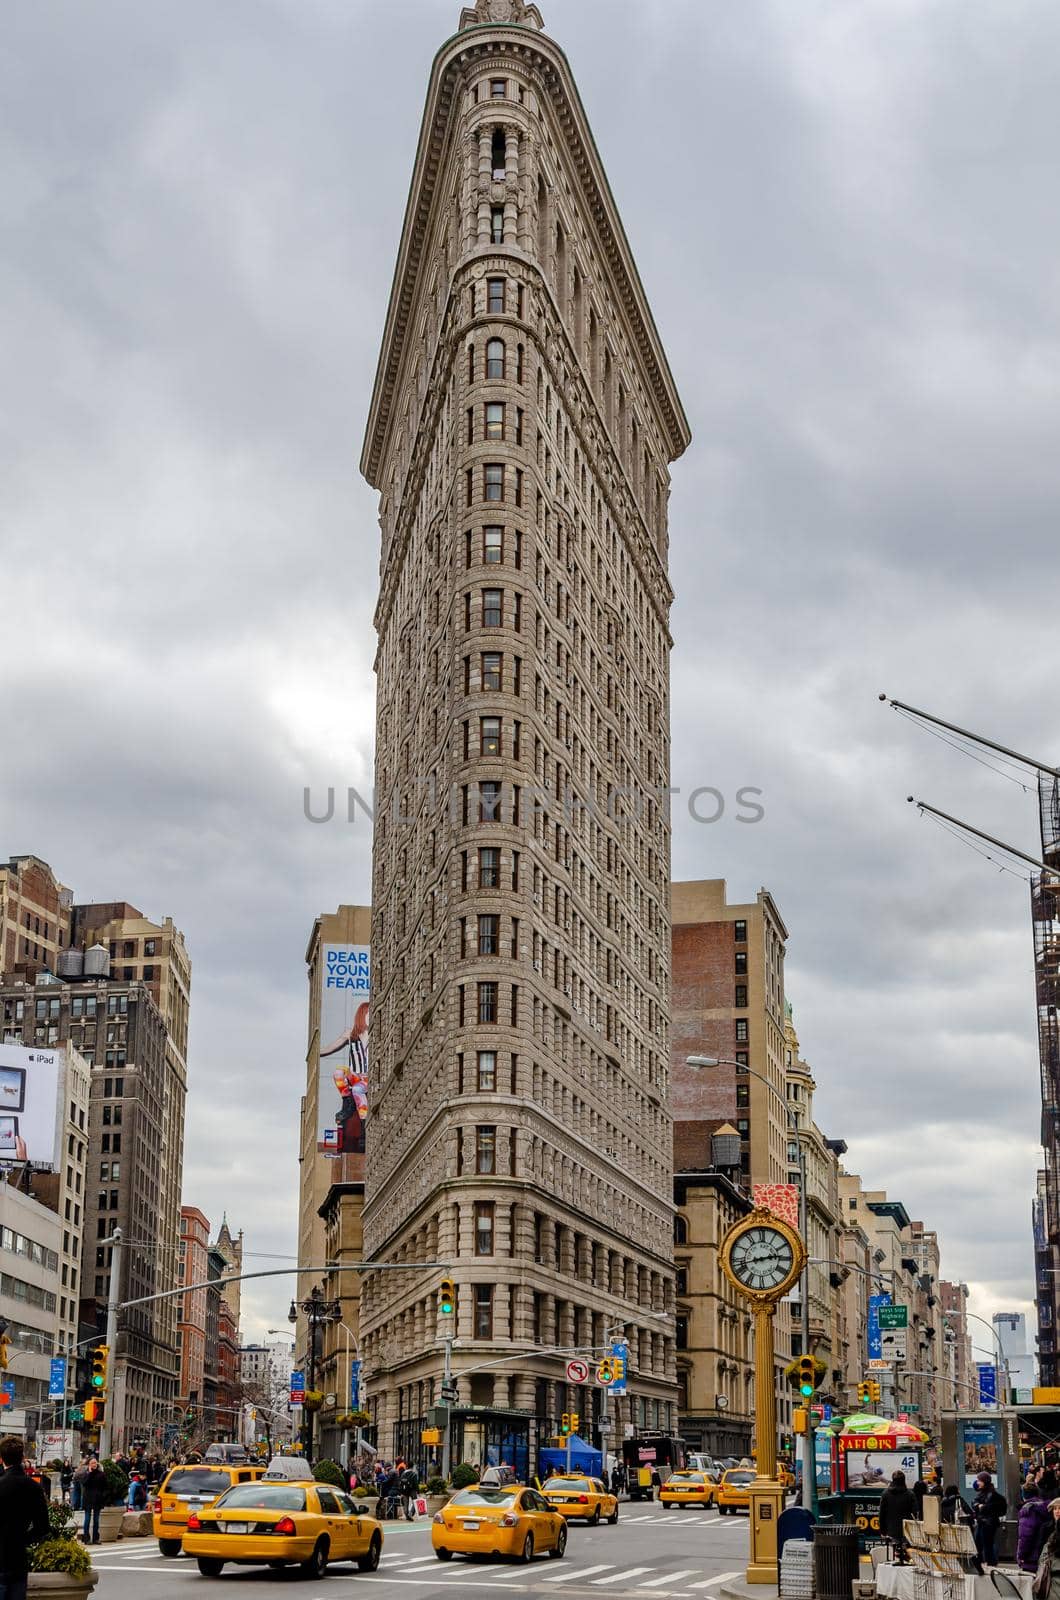 Flatiron Building New York City with street and yellow taxi cabs in forefront by bildgigant